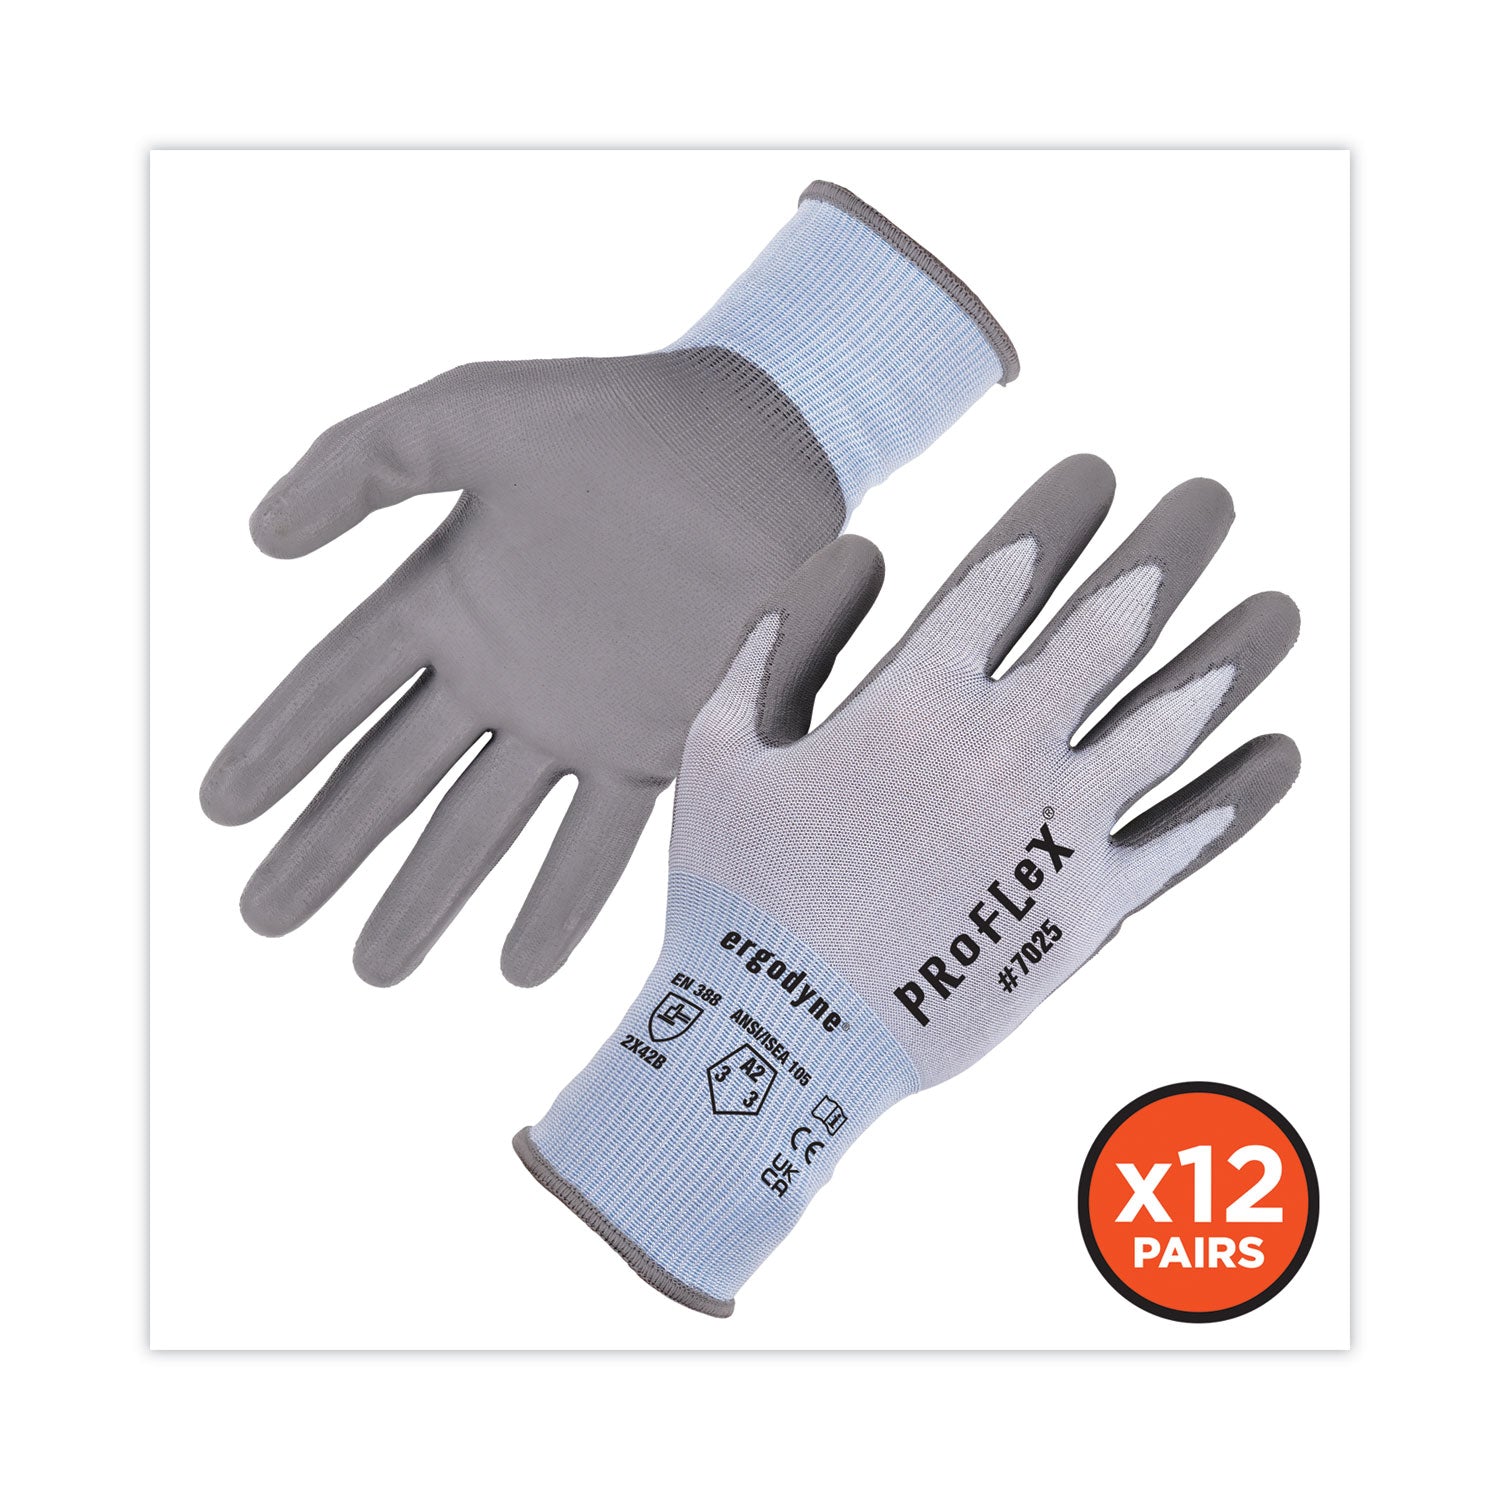 proflex-7025-ansi-a2-pu-coated-cr-gloves-blue-small-12-pairs-pack-ships-in-1-3-business-days_ego10422 - 2